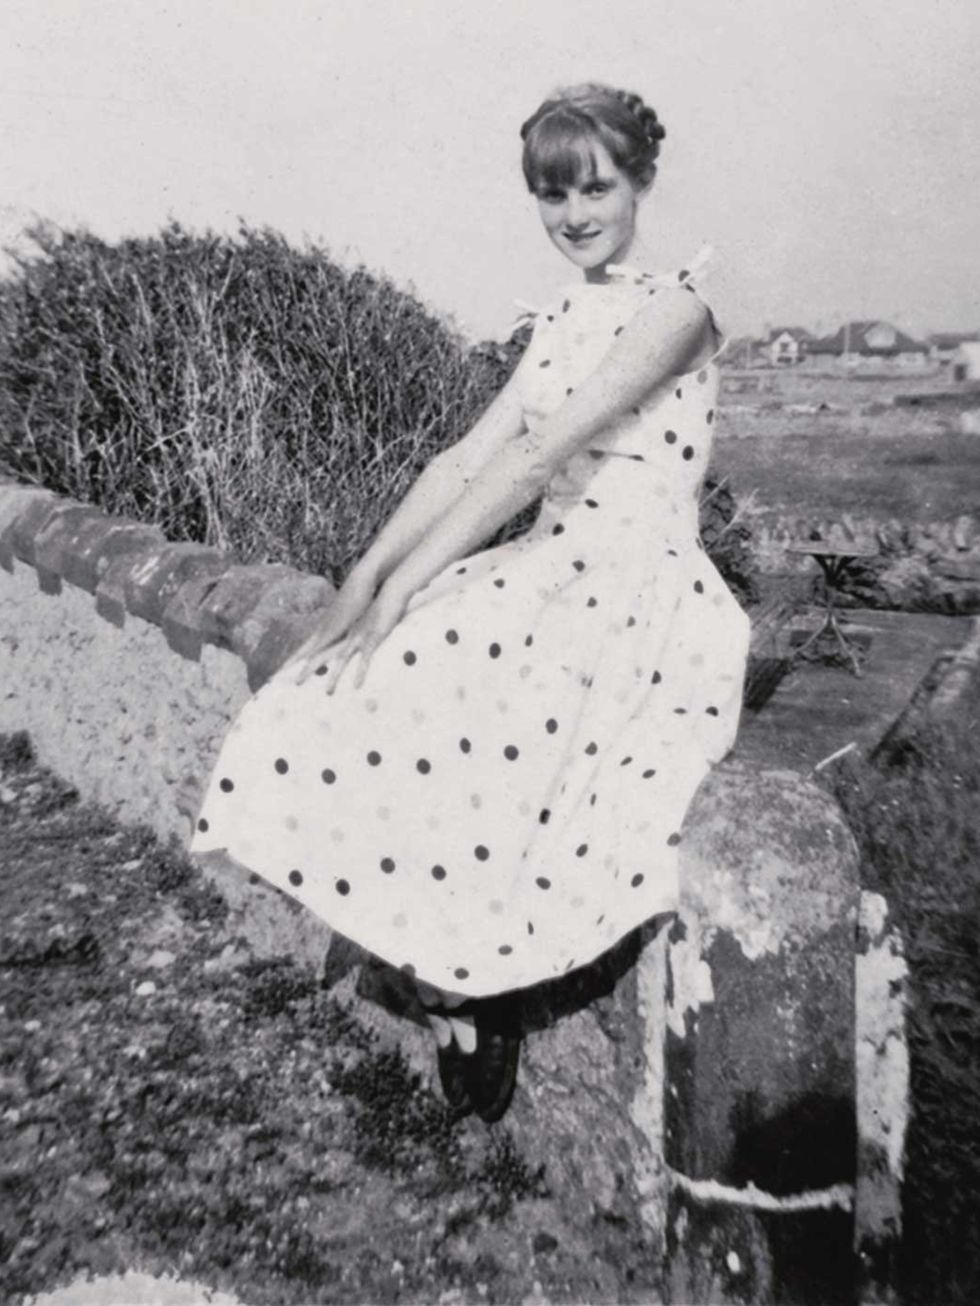 <p>'In a modelling mood at home, wearing an A-line dress, Tre-Arddur Bay, 1954'</p>